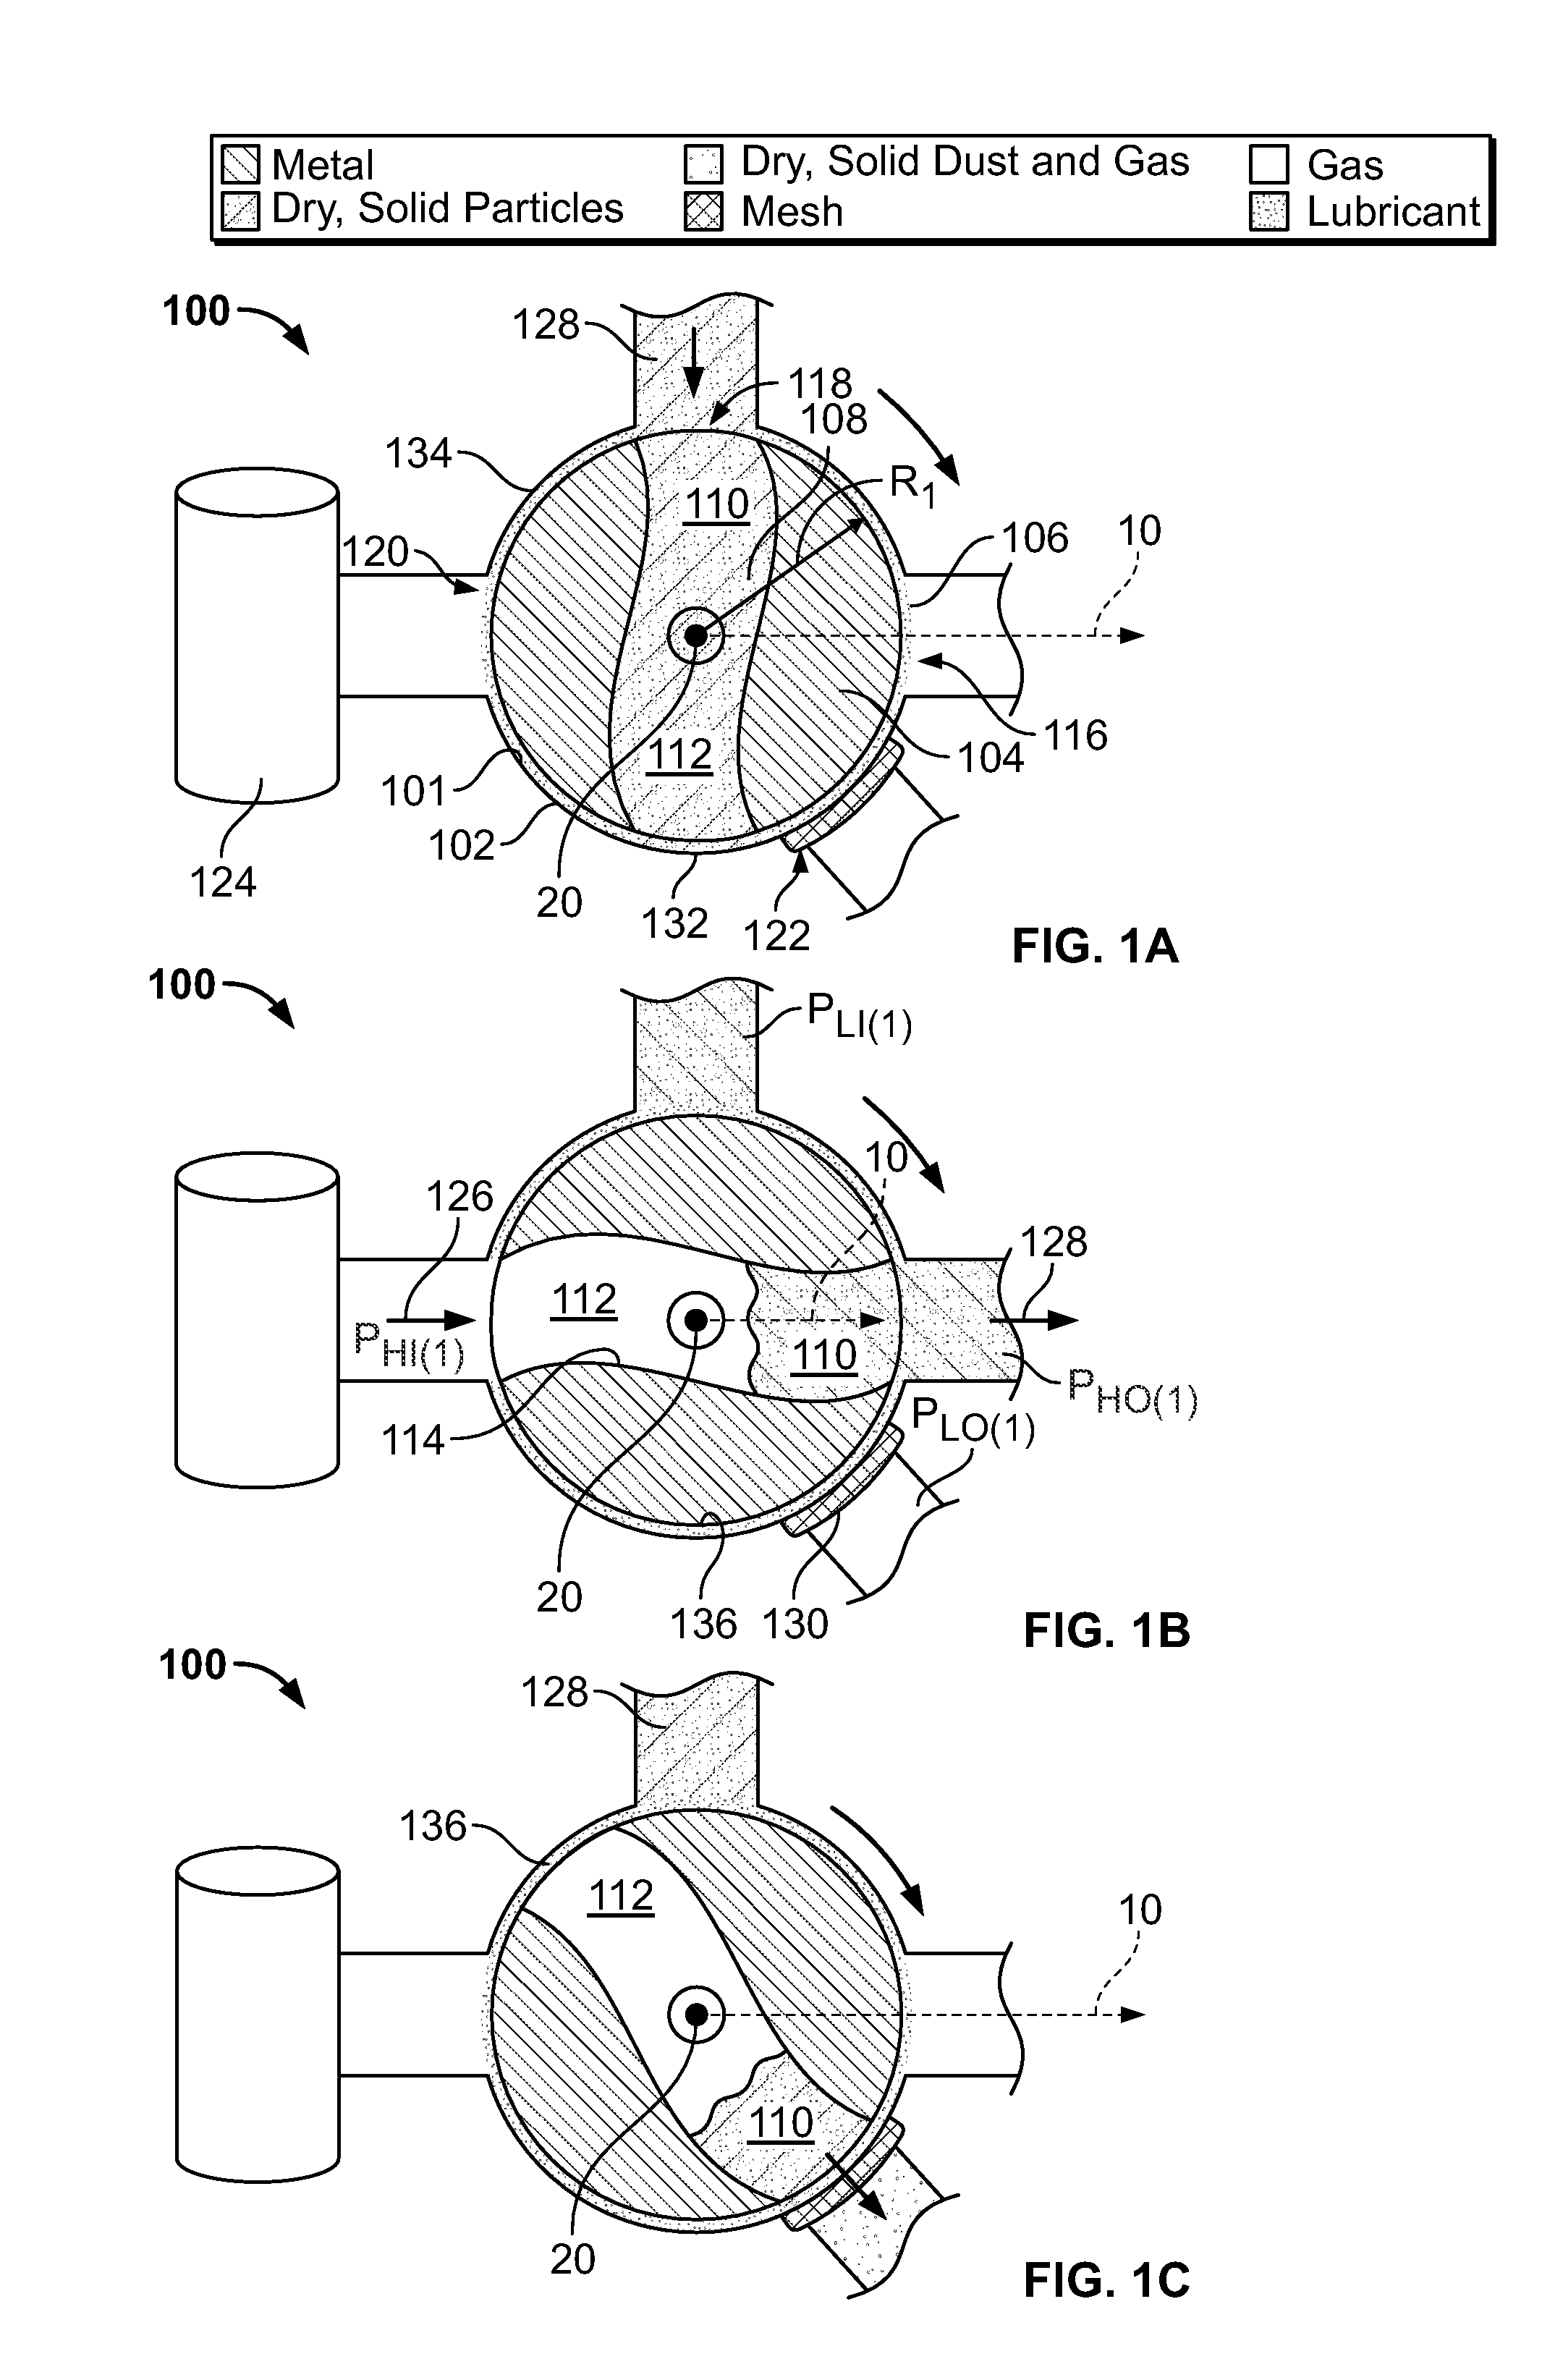 Rotary apparatus for use with a gasifier system and methods of using the same